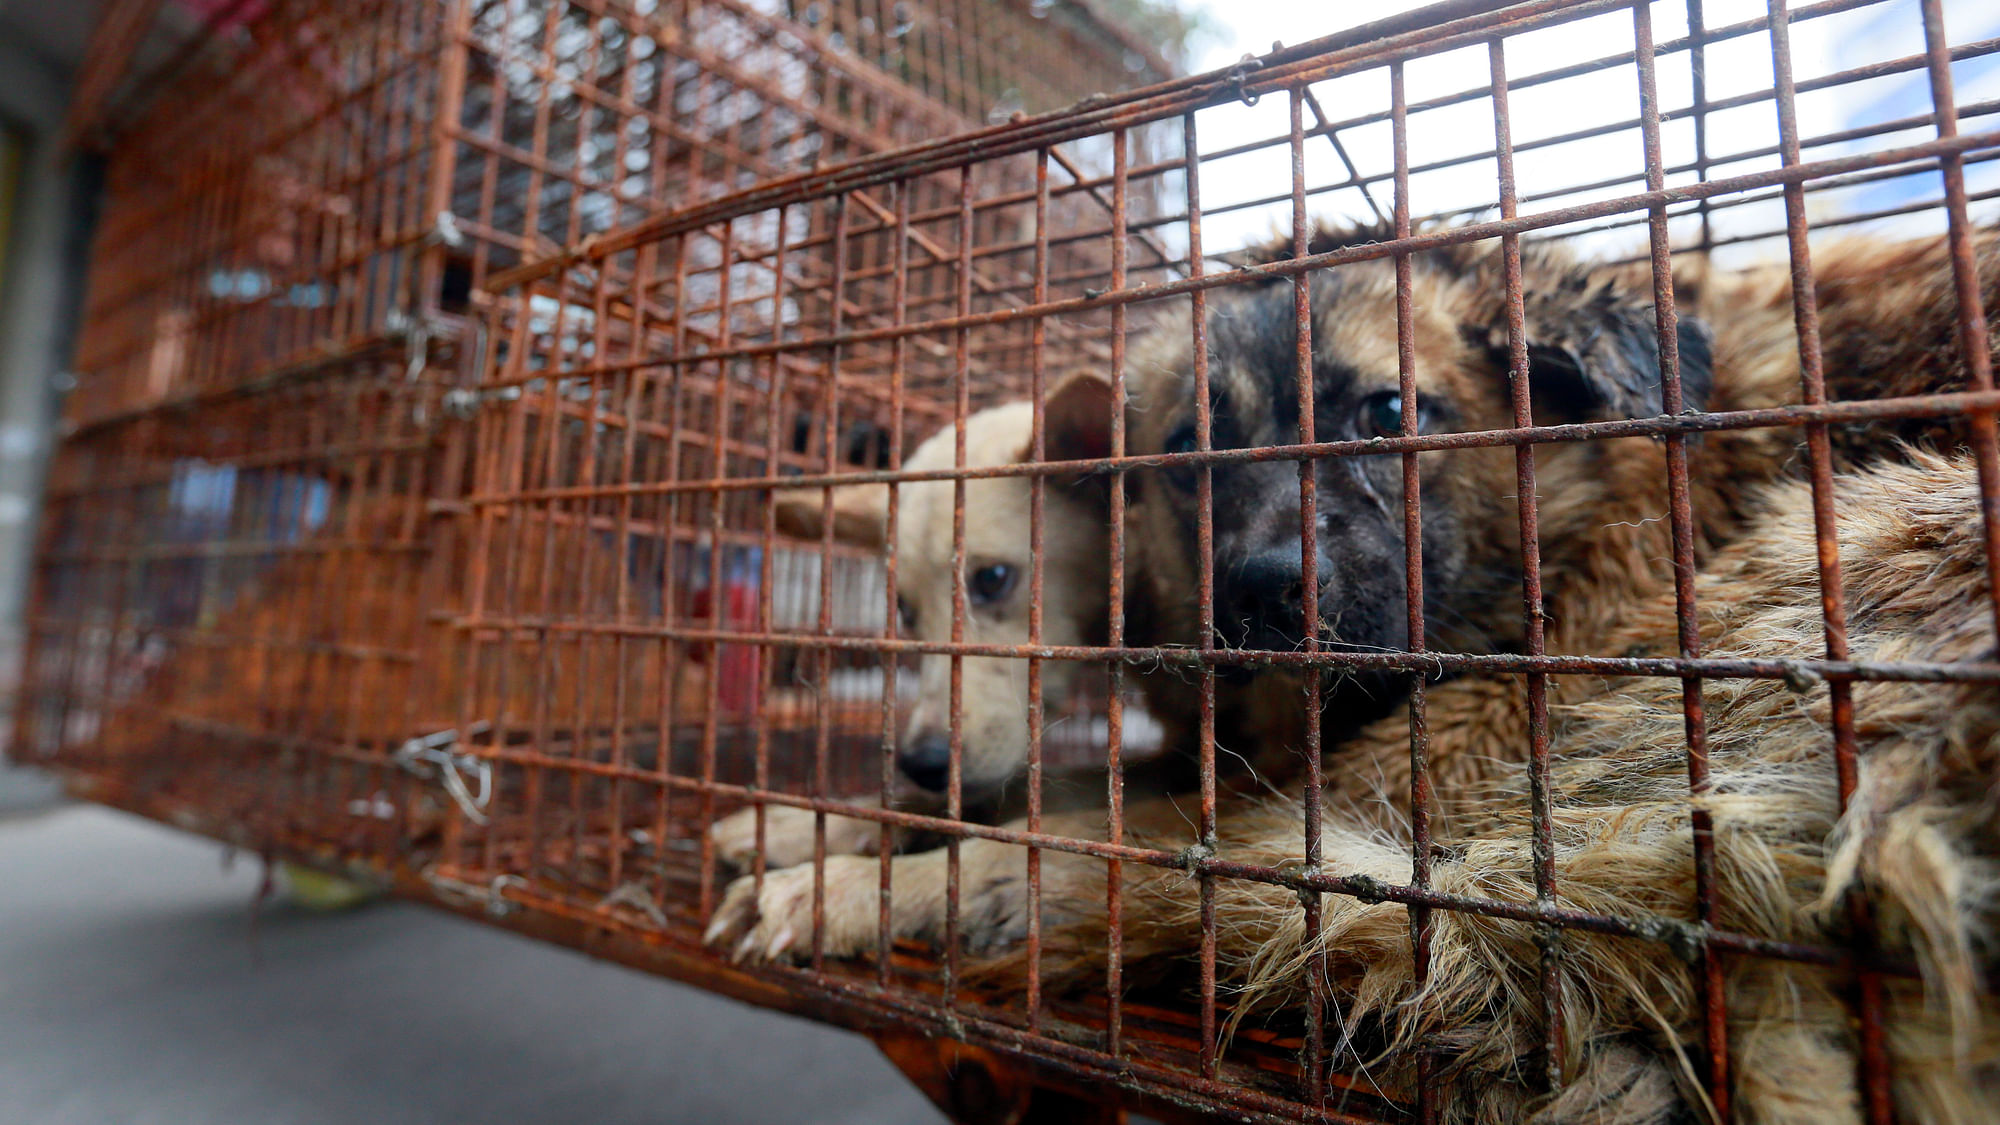  Caged dogs sit inside a cafe on the road side, waiting to be transferred to a slaughterhouse in a narrow alley. (Photo: AP)